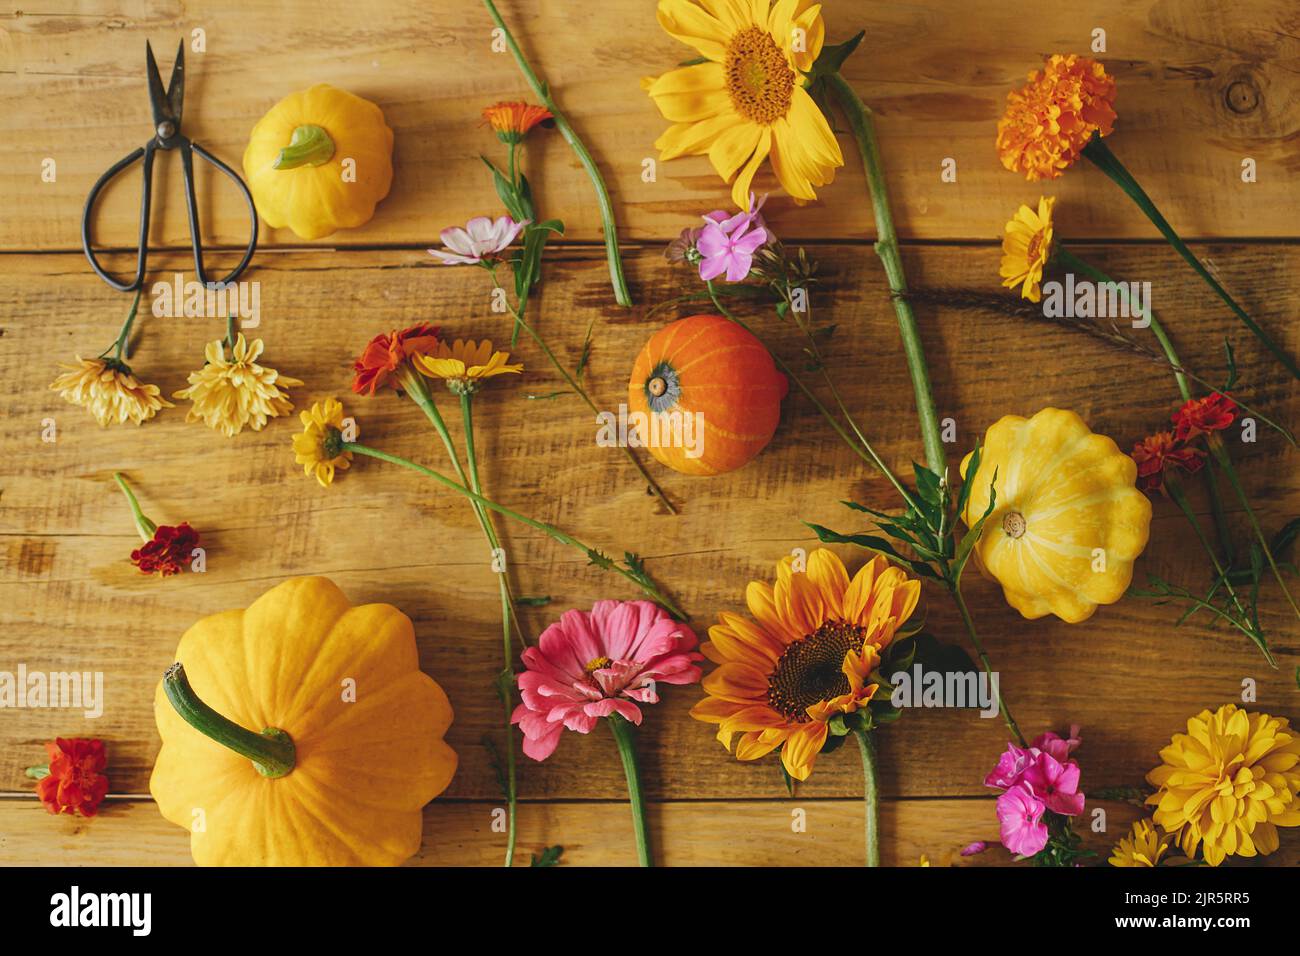 Autumn rustic composition. Colorful autumn flowers, pumpkins, pattypan squashes, scissors on wooden table flat lay. Harvest time in countryside, arran Stock Photo